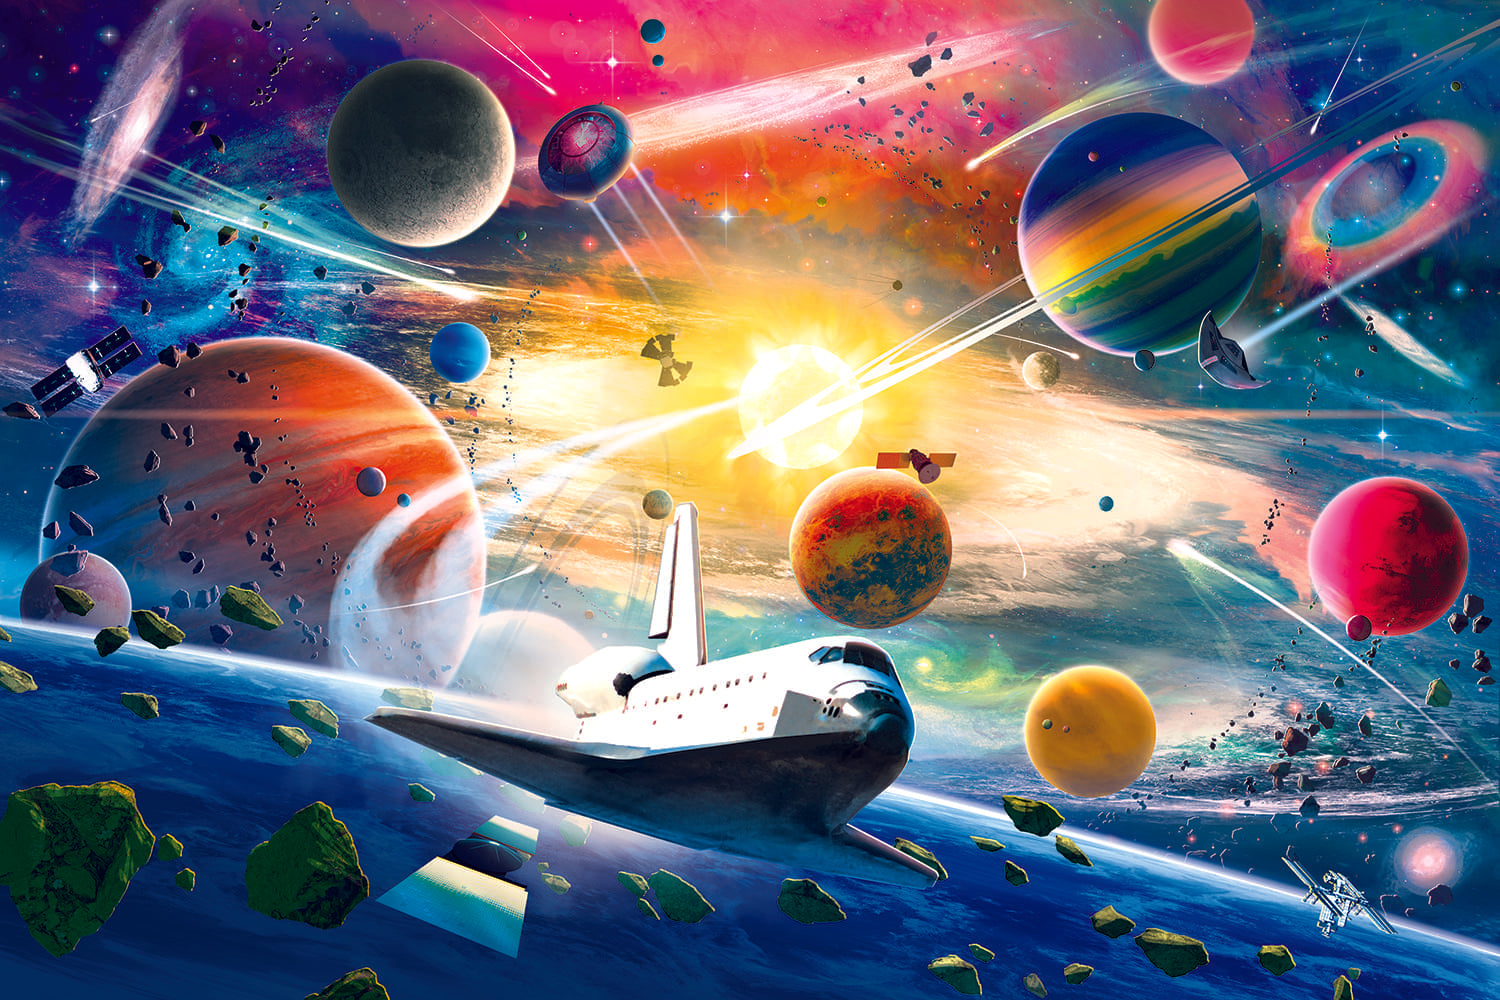 Space Exploration Galaxy Puzzle For Adults And Kids | 1000 Piece Jigsaw Puzzle